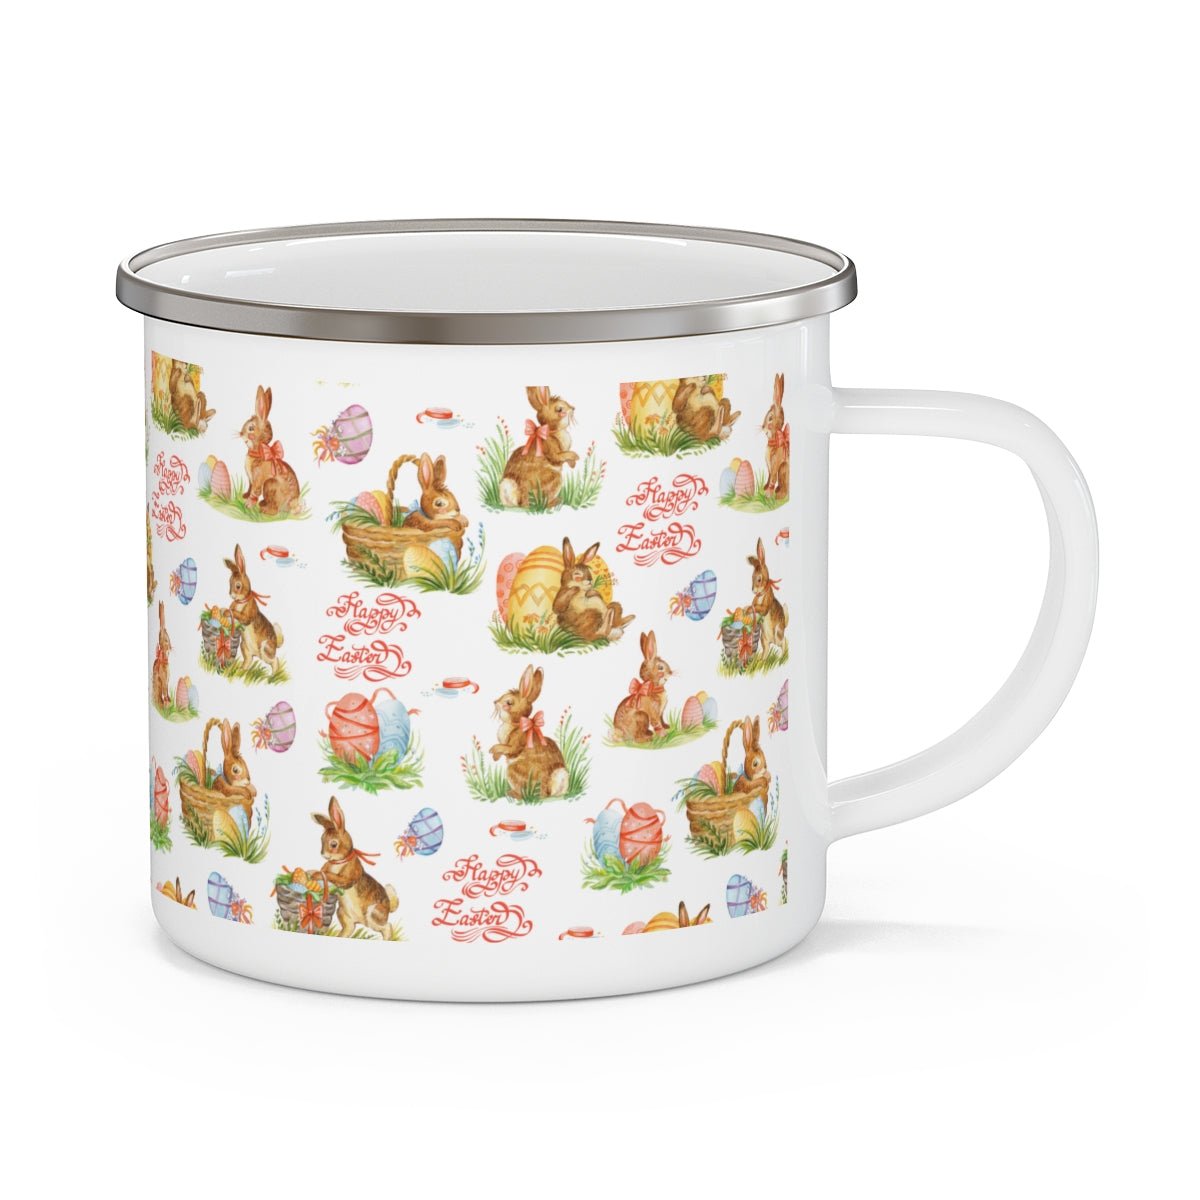 Easter Bunnies in Baskets Stainless Steel Camping Mug - Puffin Lime